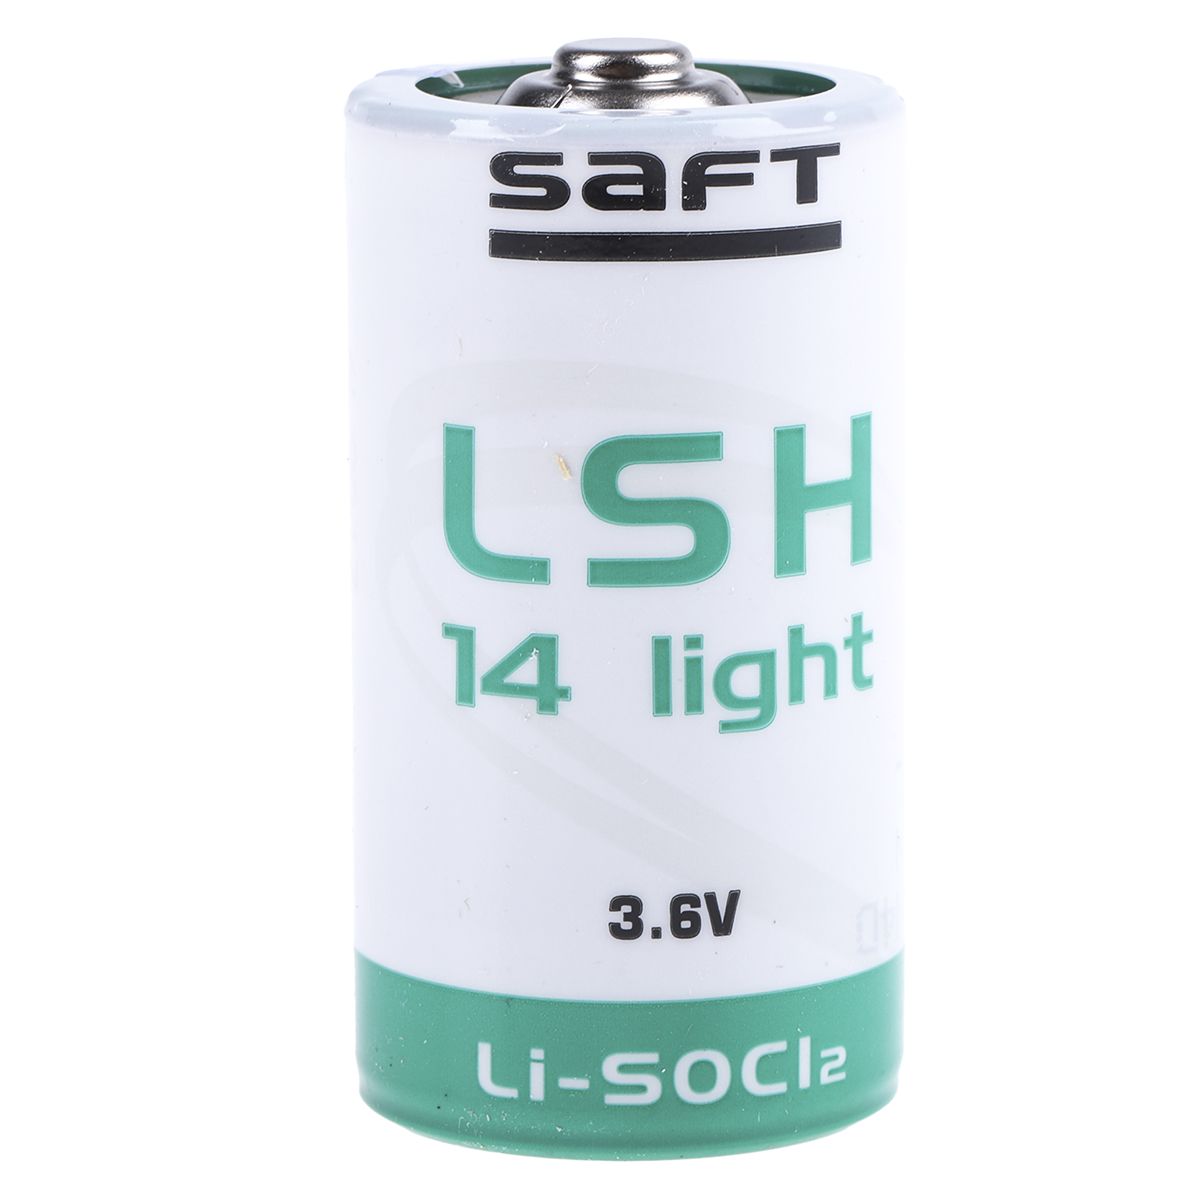 Saft 3.6V Lithium Thionyl Chloride C Battery With Standard Terminal Type